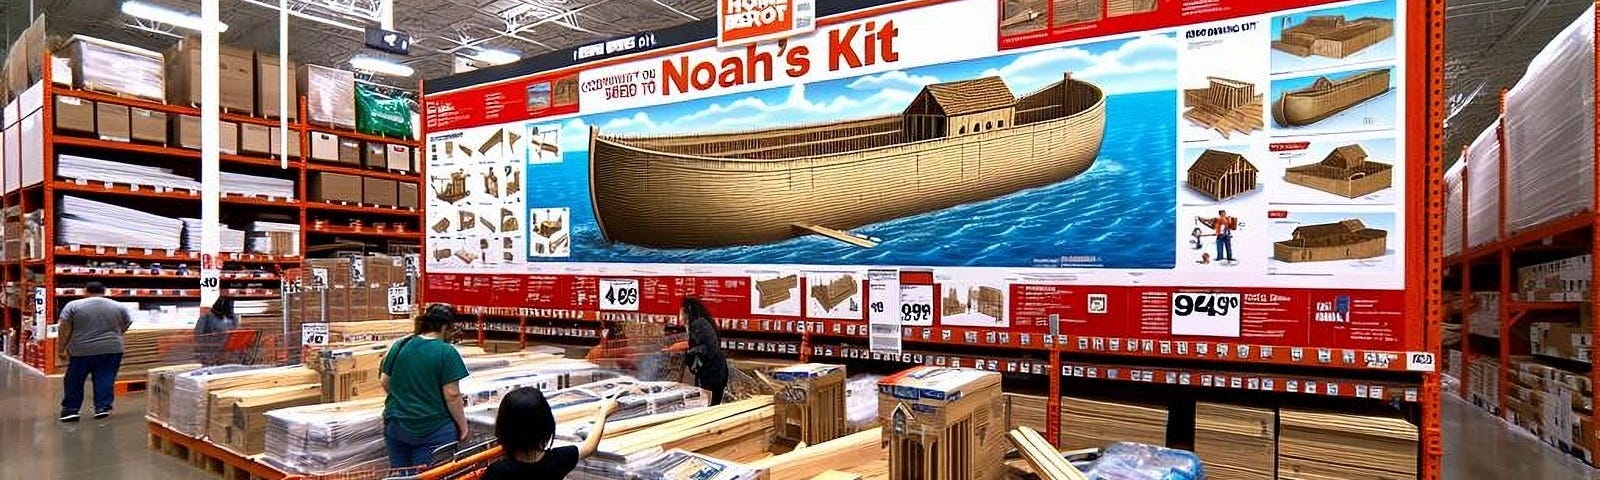 Buying a DIY Ark building kit at the hardware store.